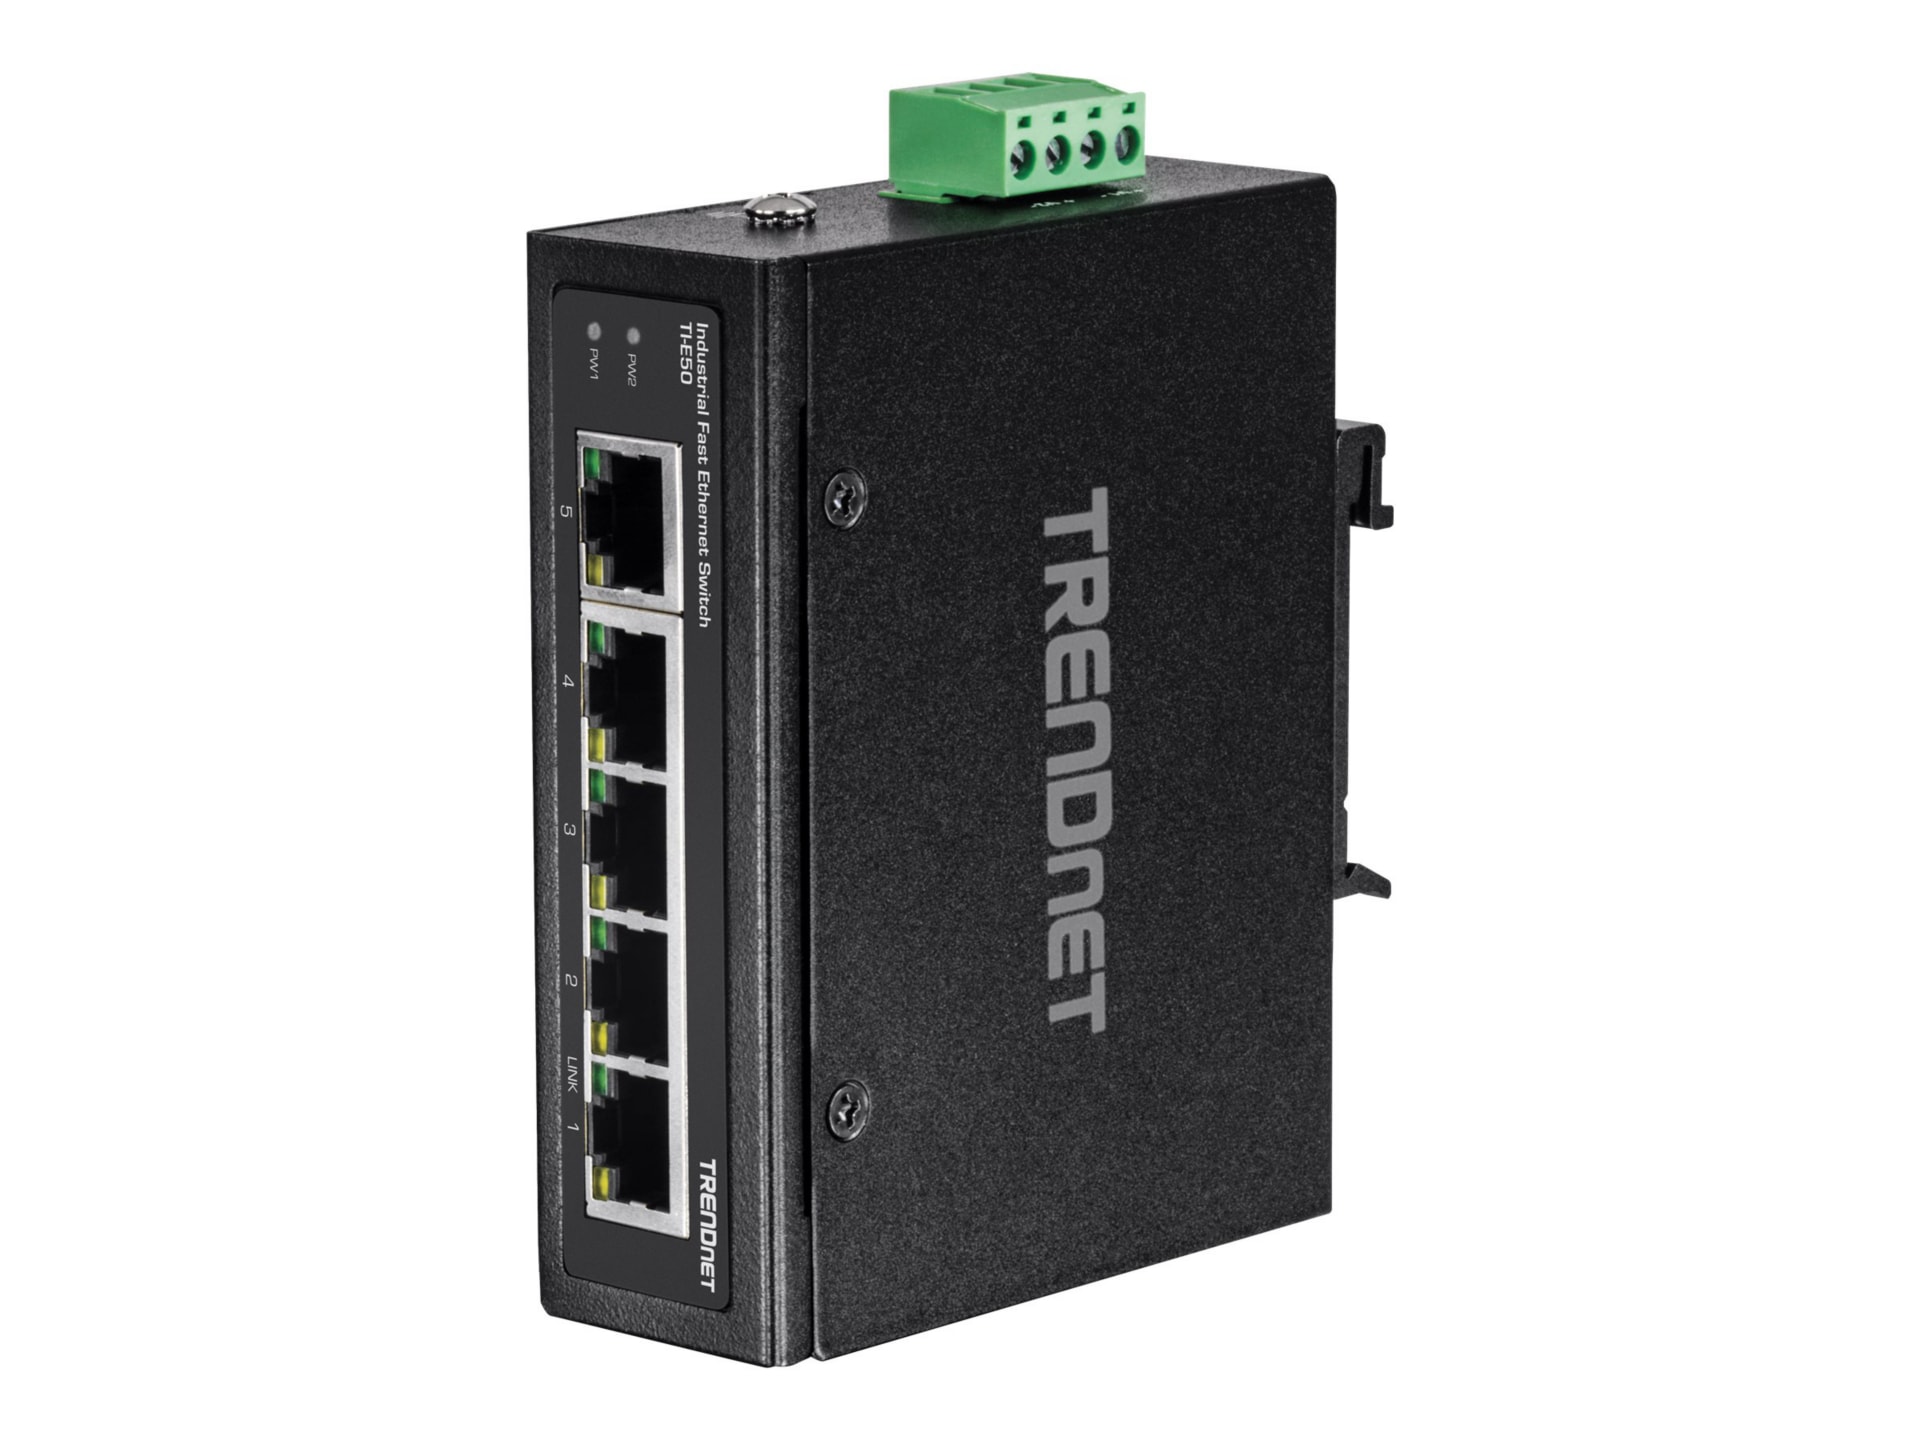 TRENDnet 5-Port Industrial Unmanaged Fast Ethernet DIN-Rail Switch, 5 x Fast Ethernet Ports, IP30, Operating Temperature